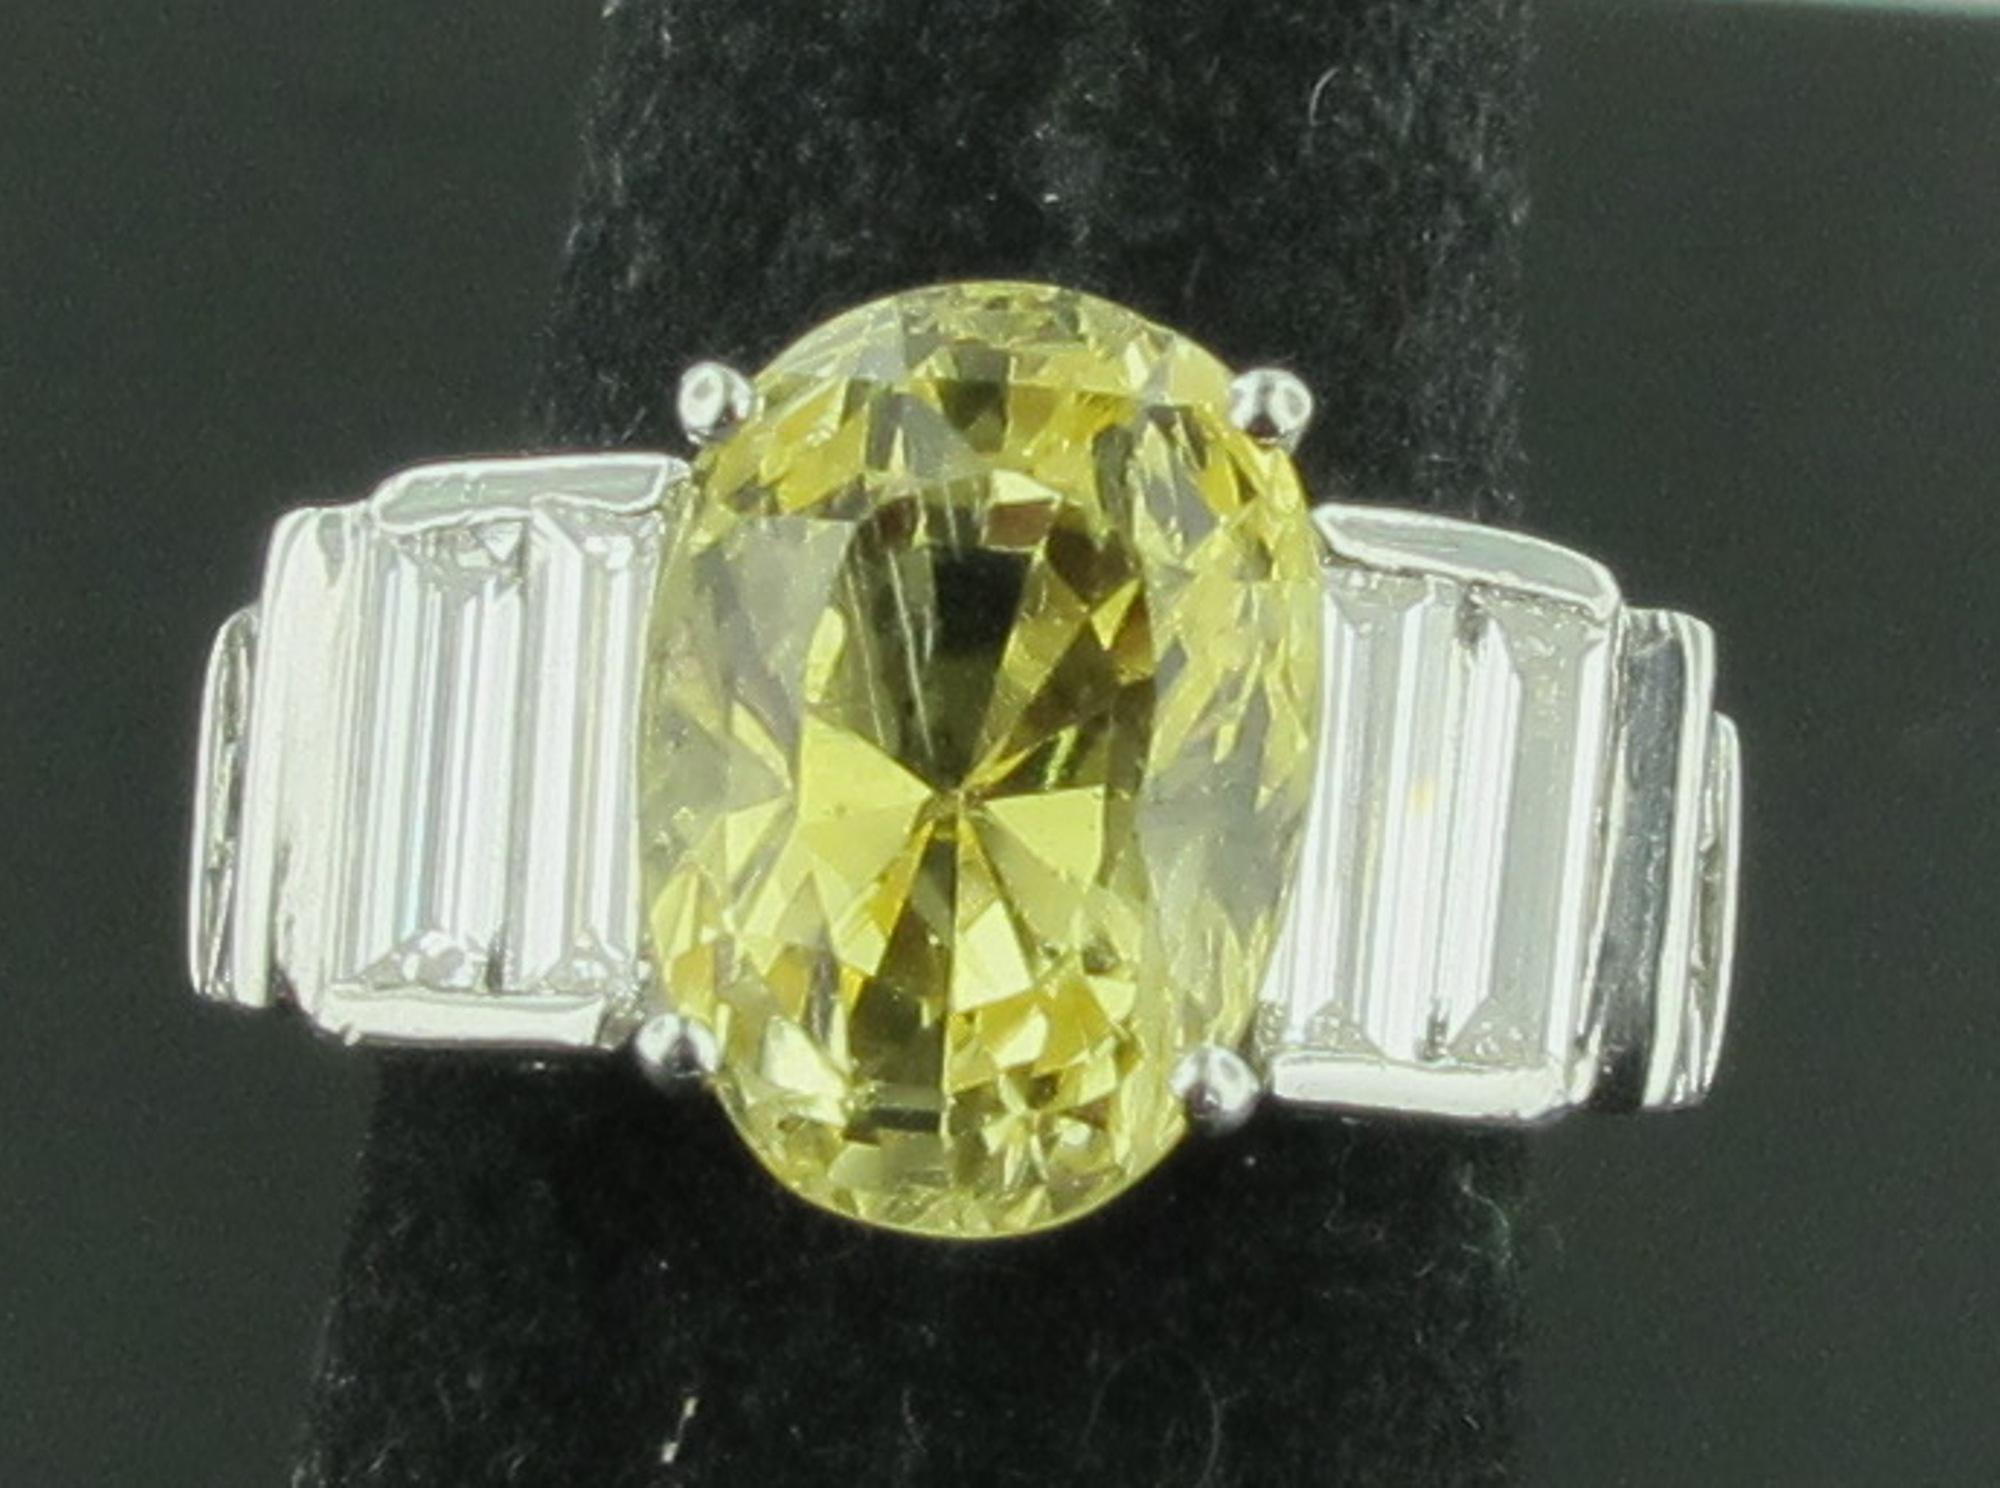 Fancy Yellow Cut Sapphire weighing 7.94 carats set in Platinum with 10 baguette diamonds on the sides with a total weight of 3.0 carats.  Platinum weight is 14 grams.  Ring is size 6.